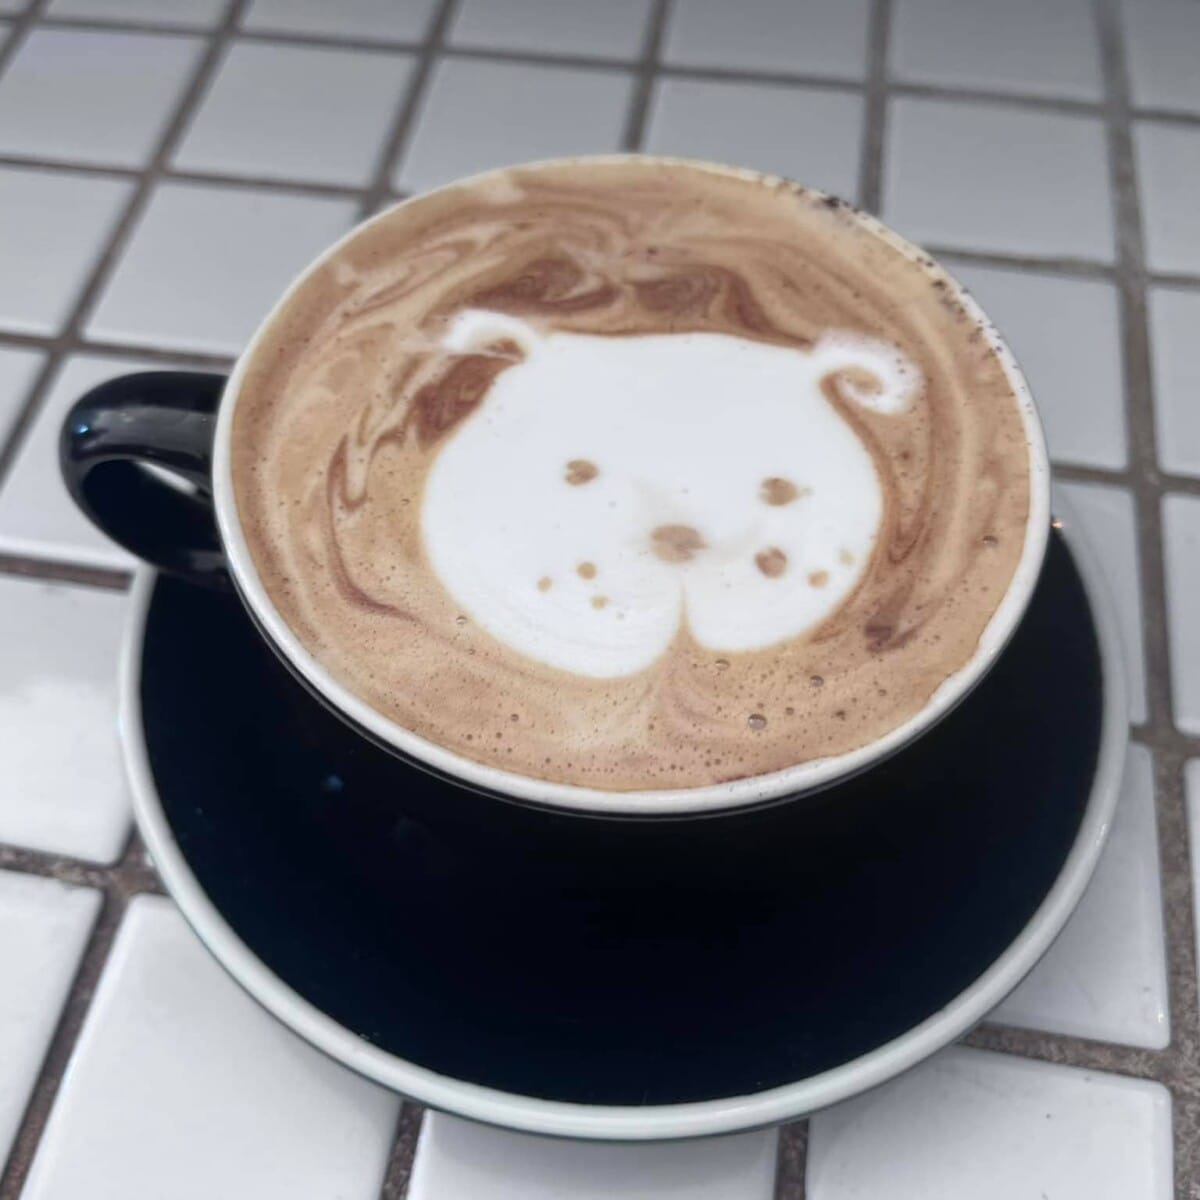 Amazing coffee art found at a dog-friendly cafe in Melbourne. It's design of a shape of a dog, so come along, grab a cup of coffee and share this experience with your furry friend